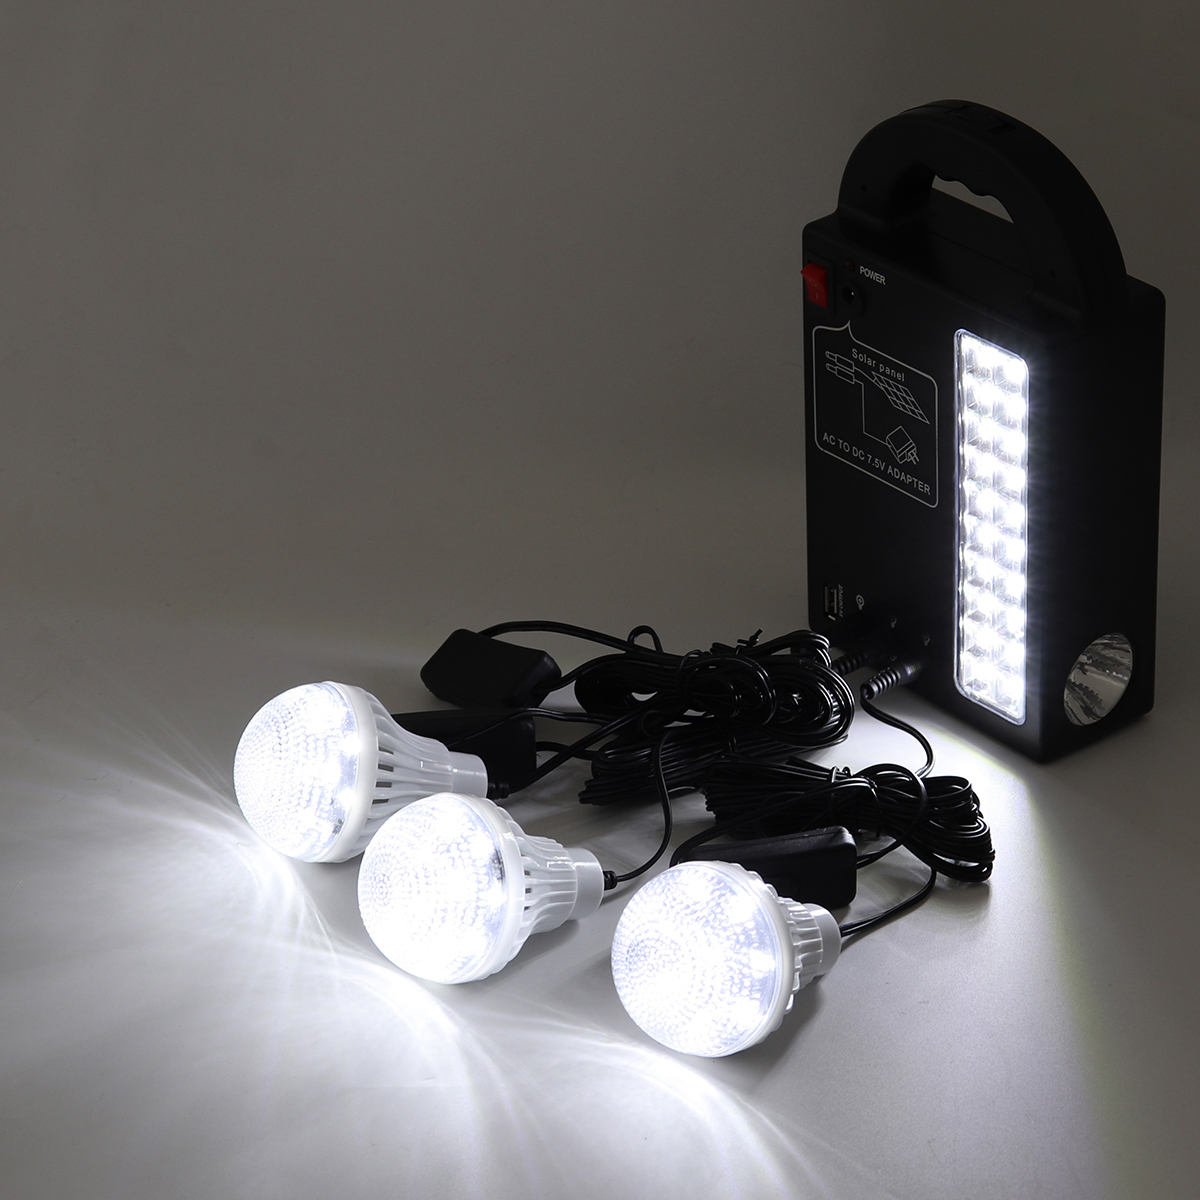 Find Solar Panel Power System USB Charger Generator Headlamp 3 LED Bulb Light for Sale on Gipsybee.com with cryptocurrencies